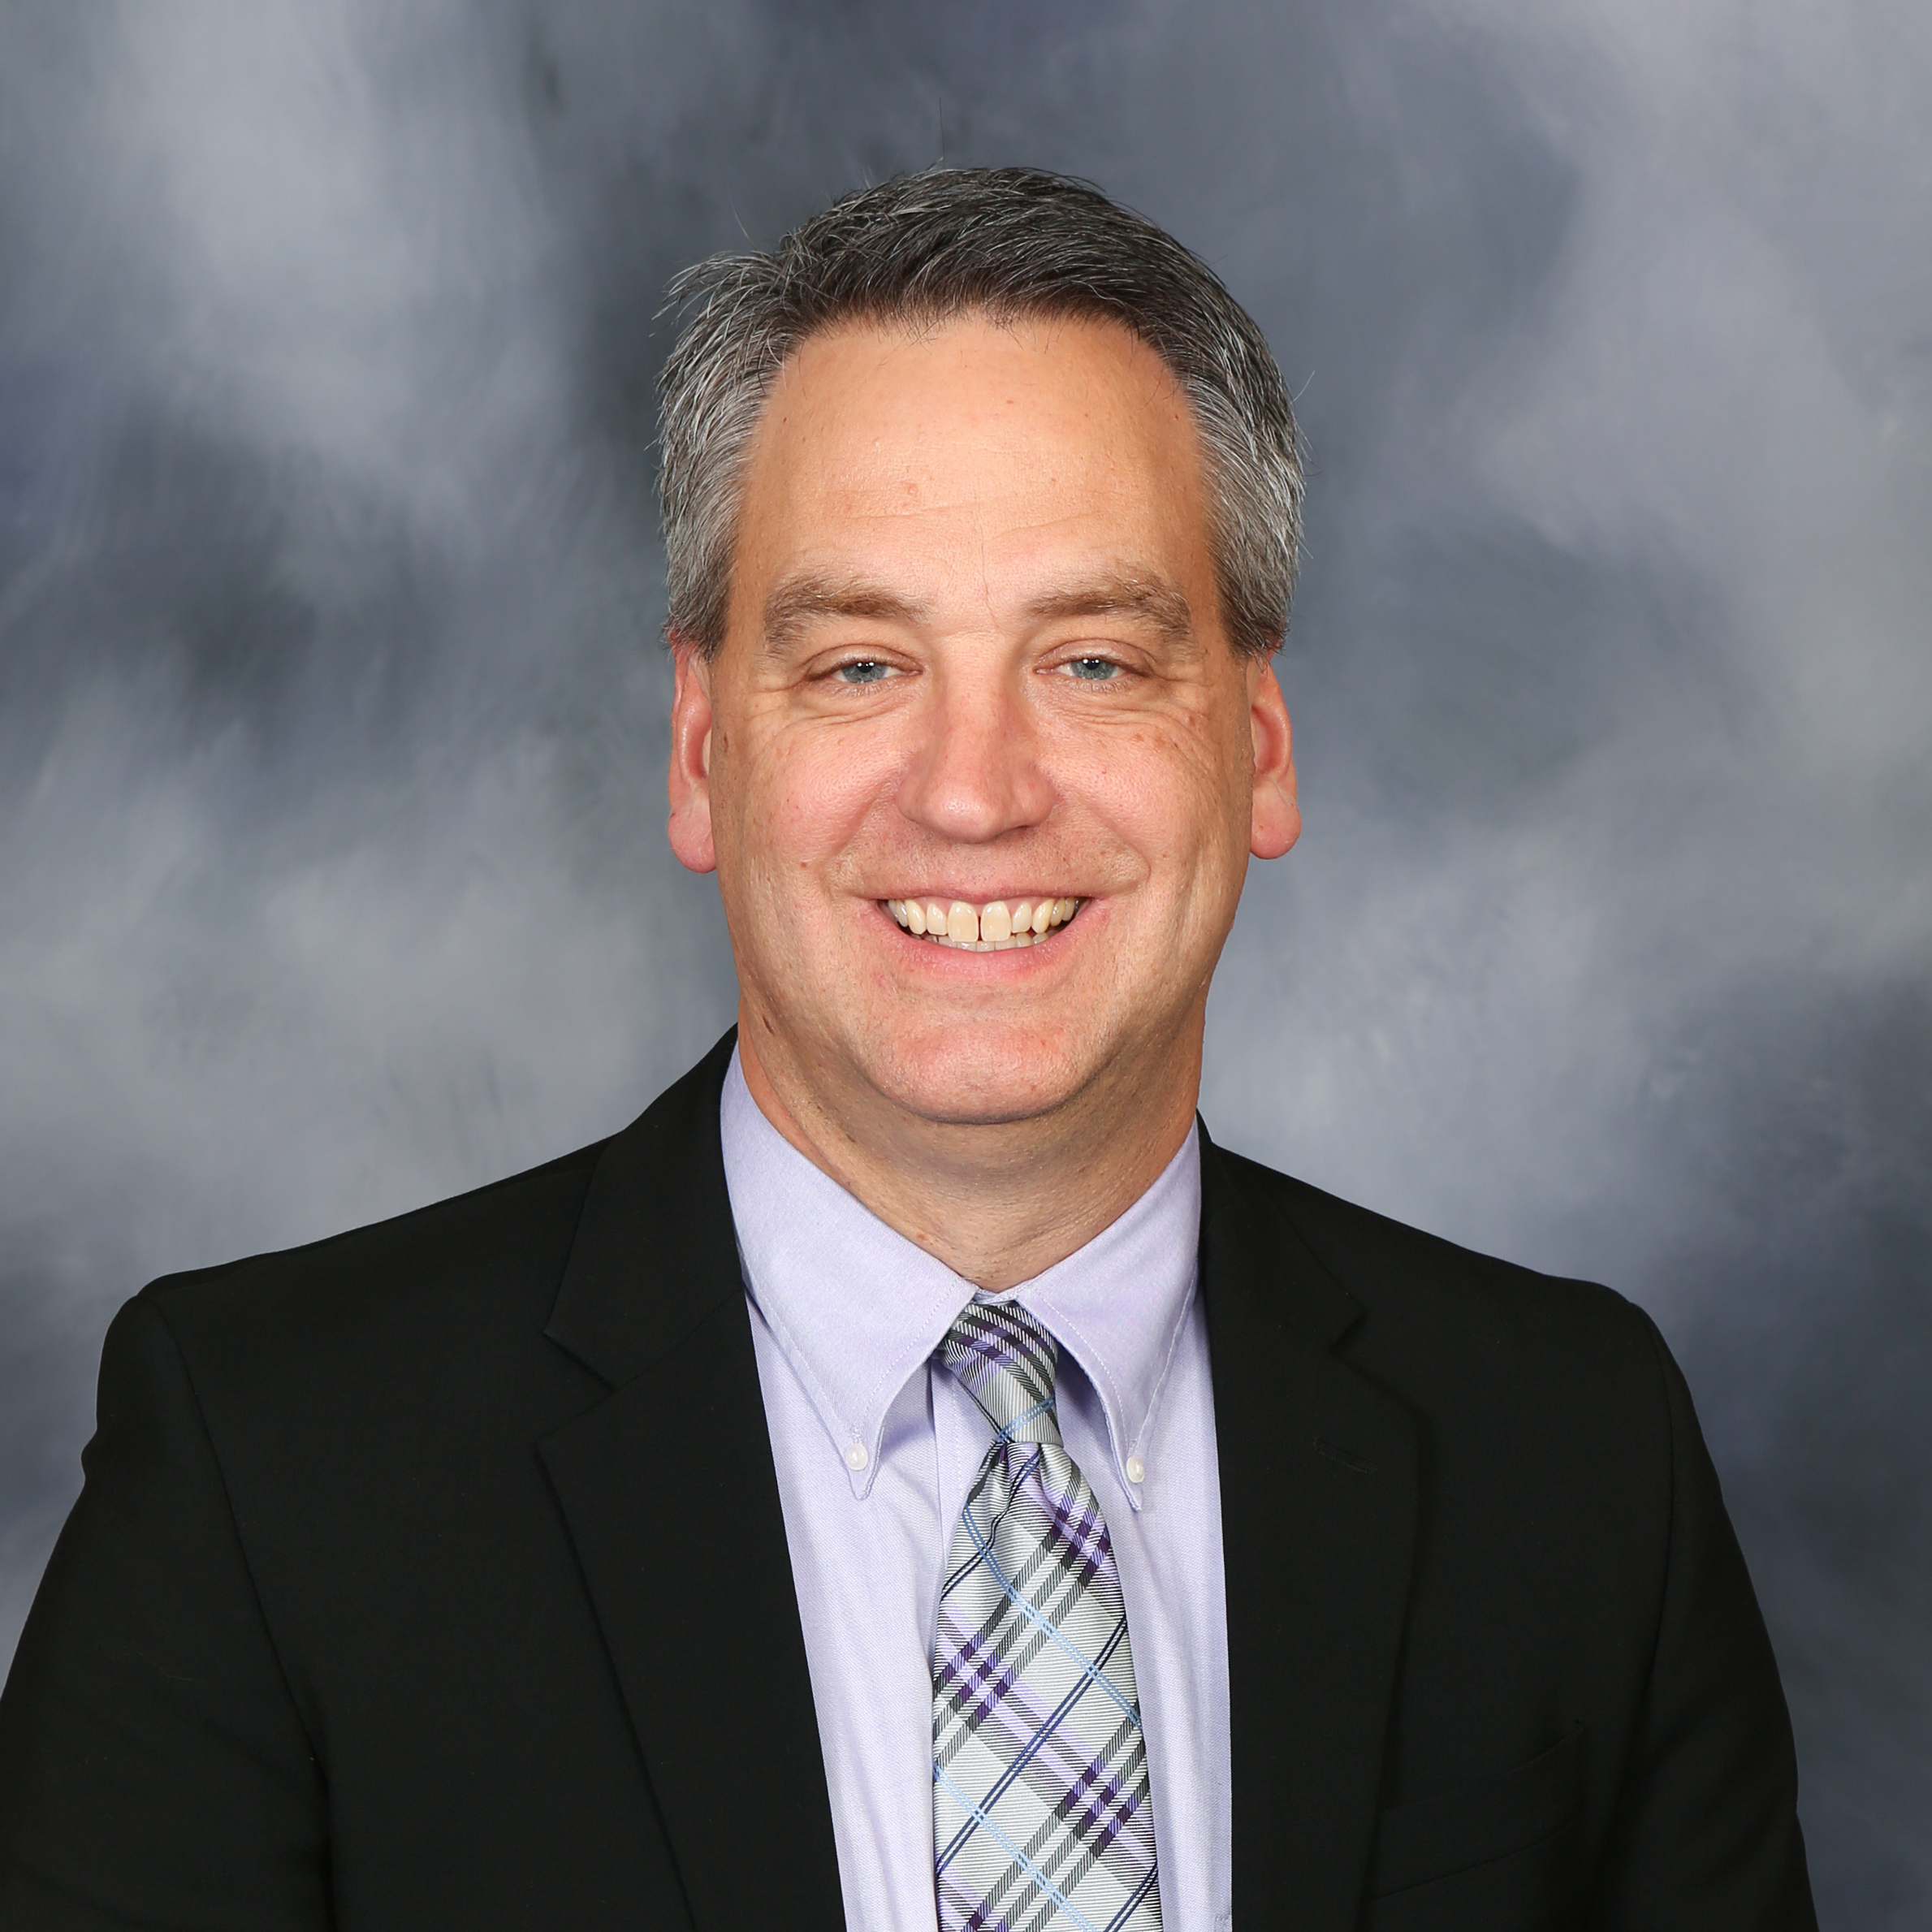 Randal A. Lutz is superintendent of the Baldwin-Whitehall School District in Pittsburgh.